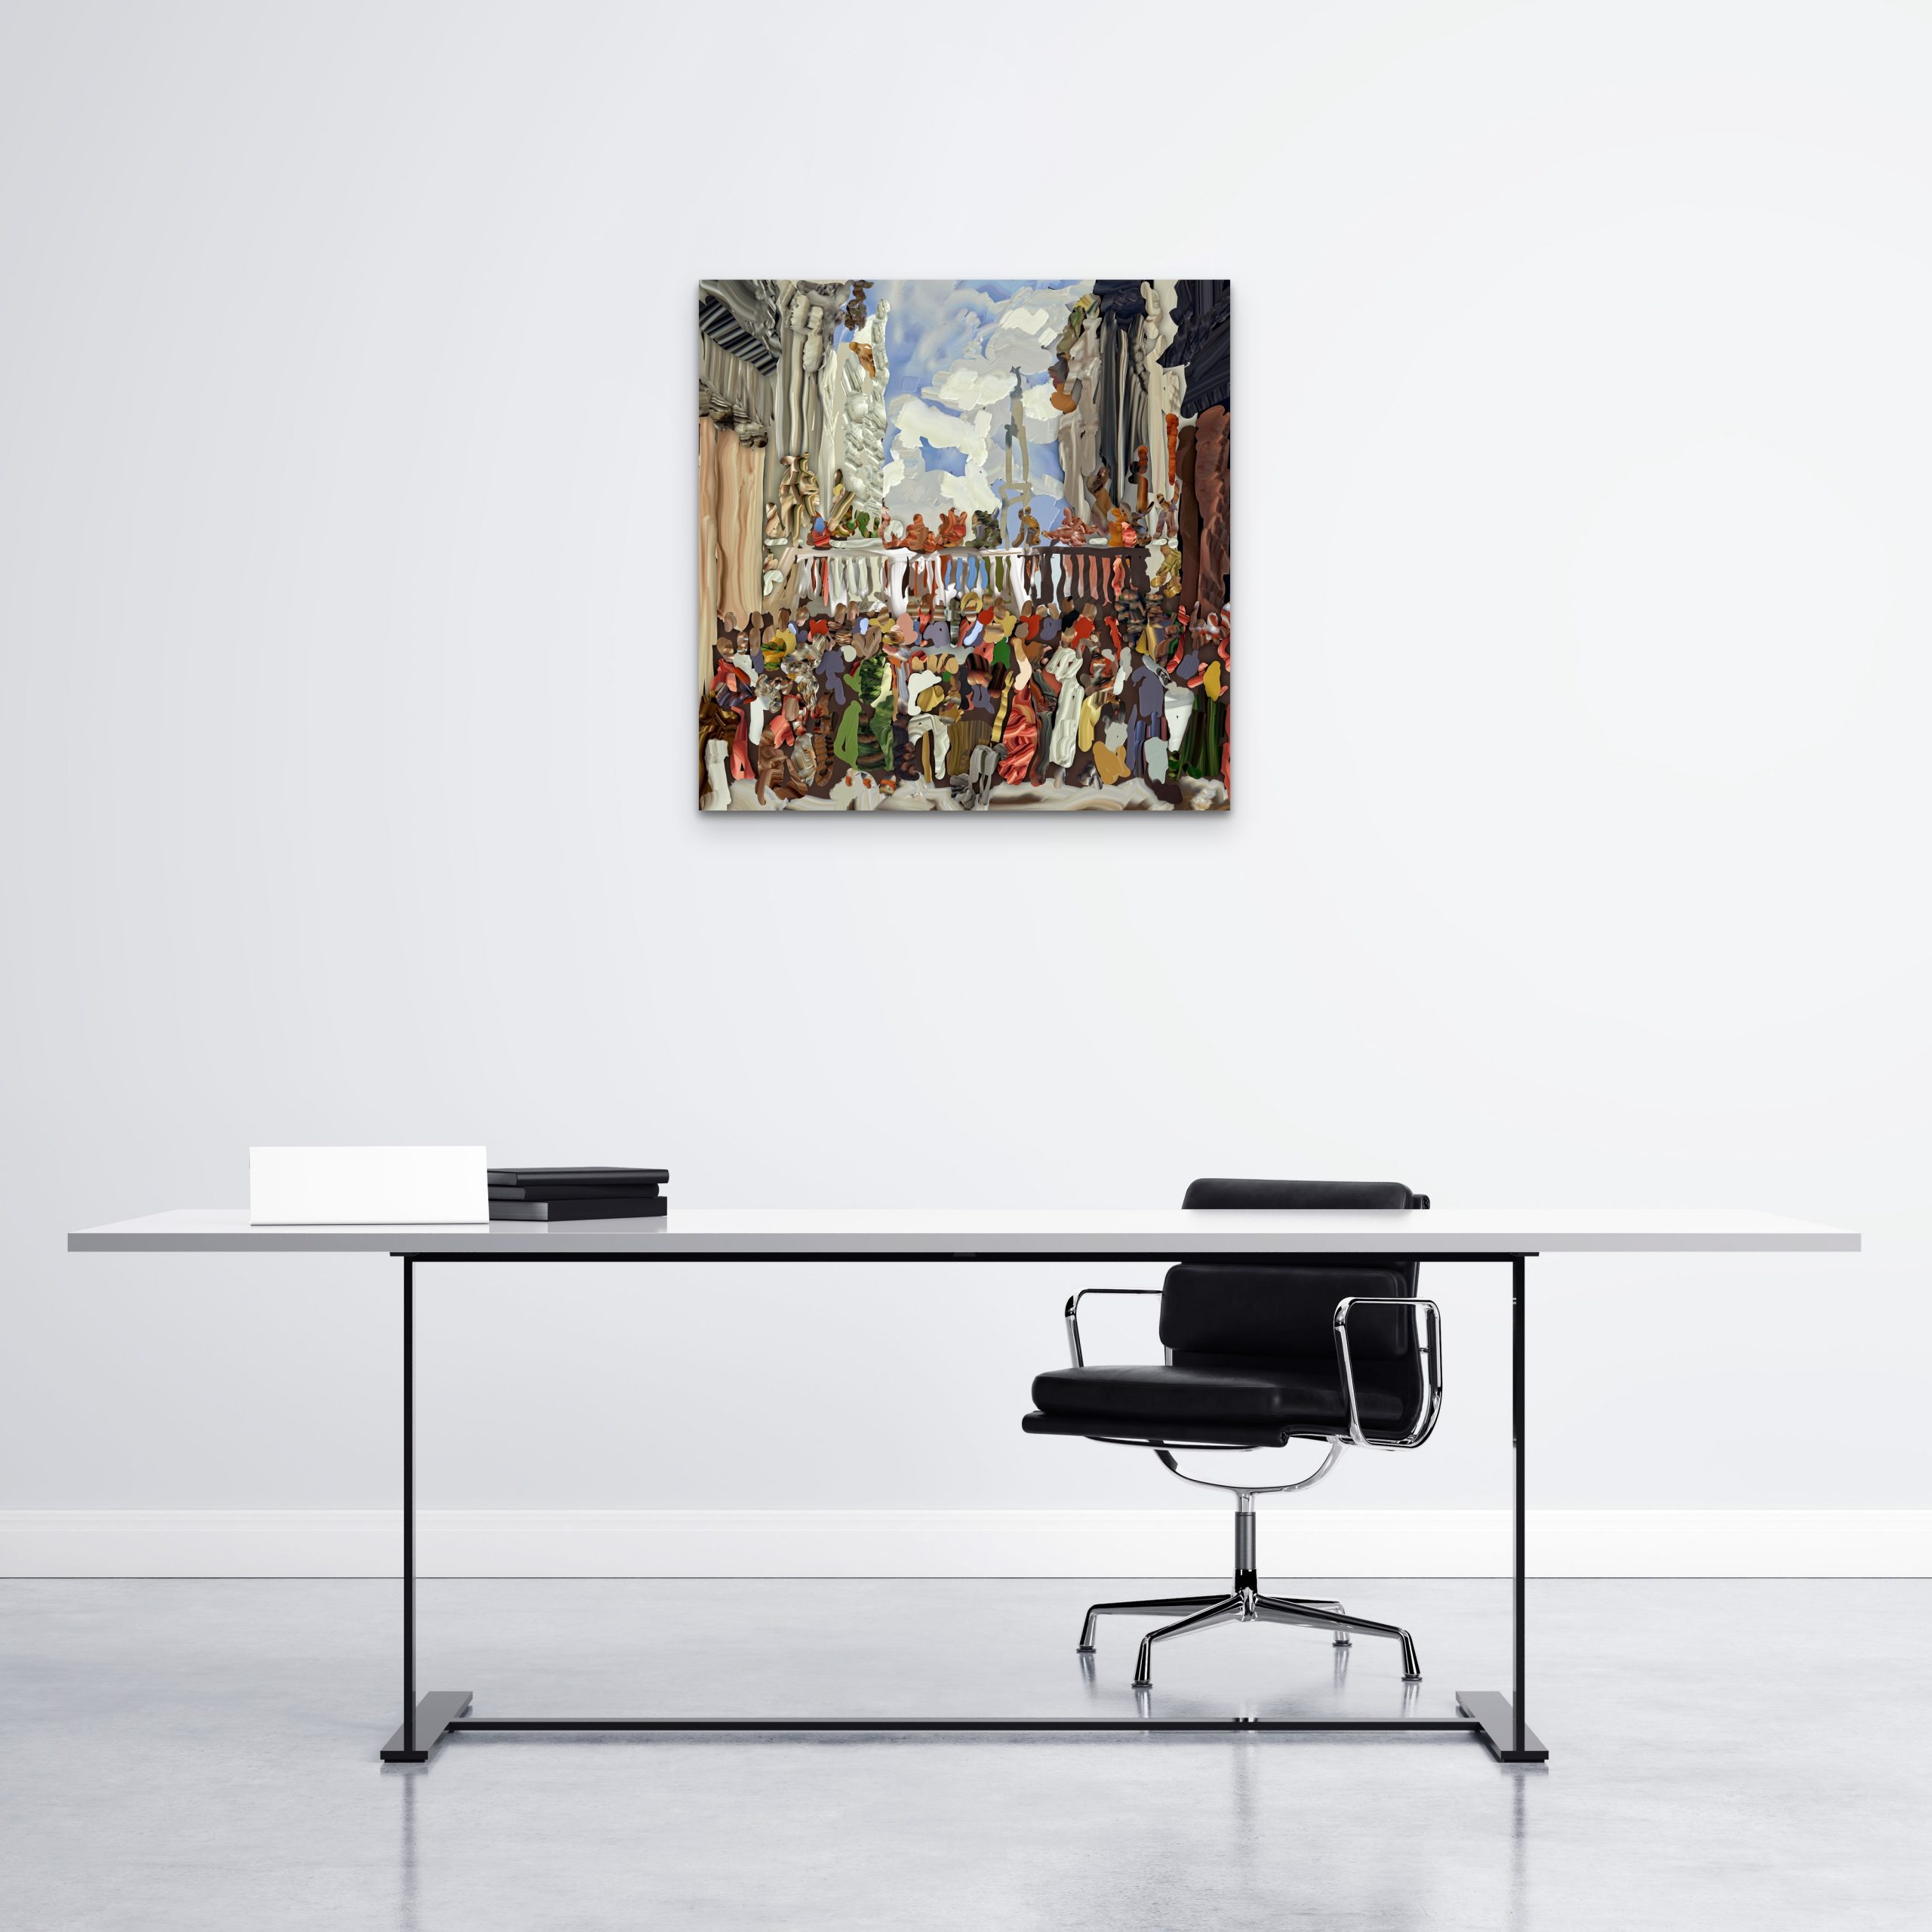 An artwork measuring 24 x 24 inches displayed in an office setting. The colorful piece adds a touch of creativity and vibrancy to the workspace, enhancing the overall aesthetic appeal.